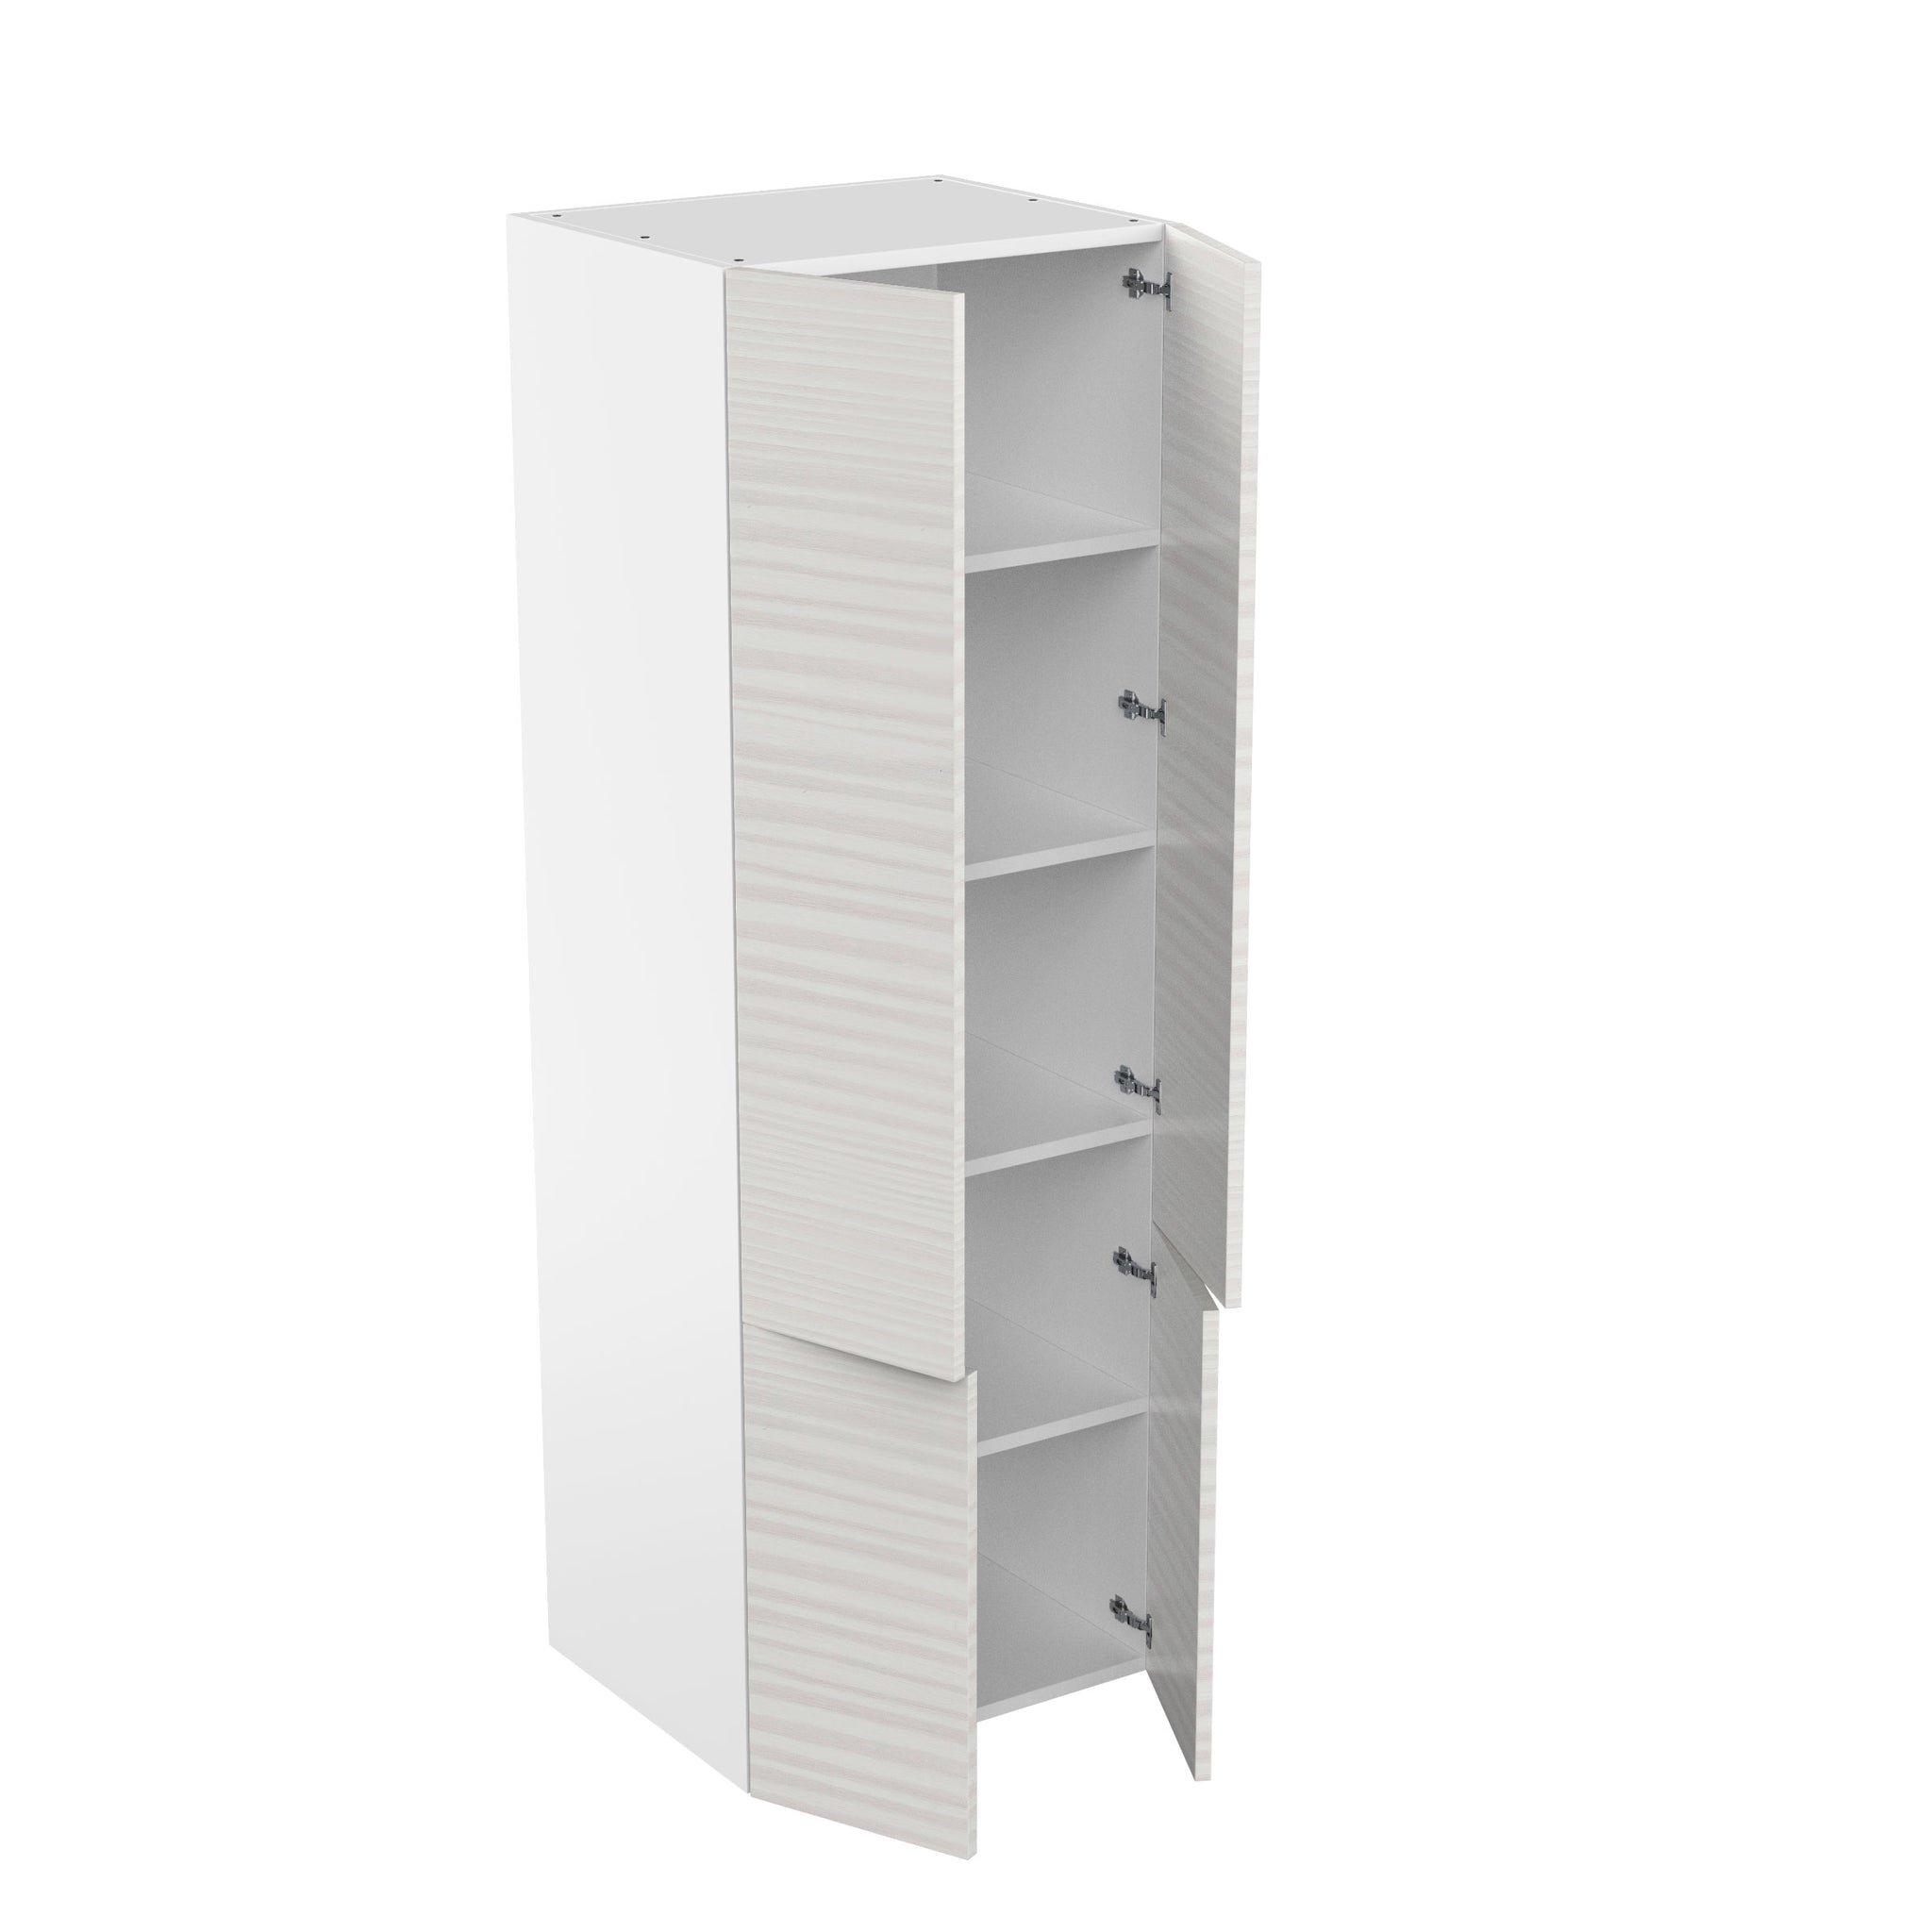 RTA - Pale Pine - Double Door Tall Cabinets | 30"W x 90"H x 23.8"D